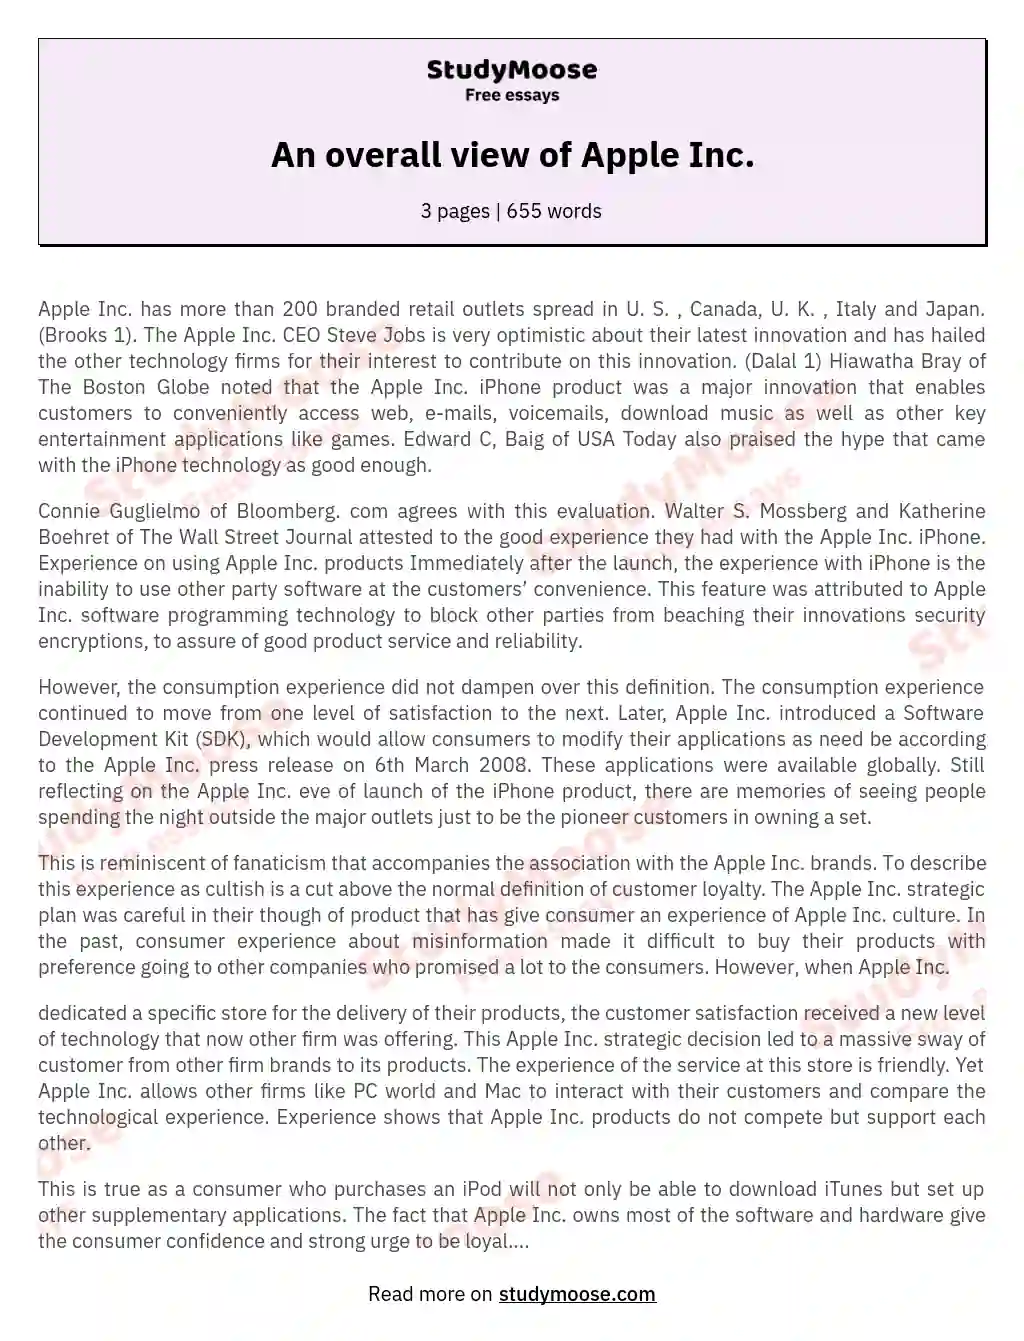 An overall view of Apple Inc. essay